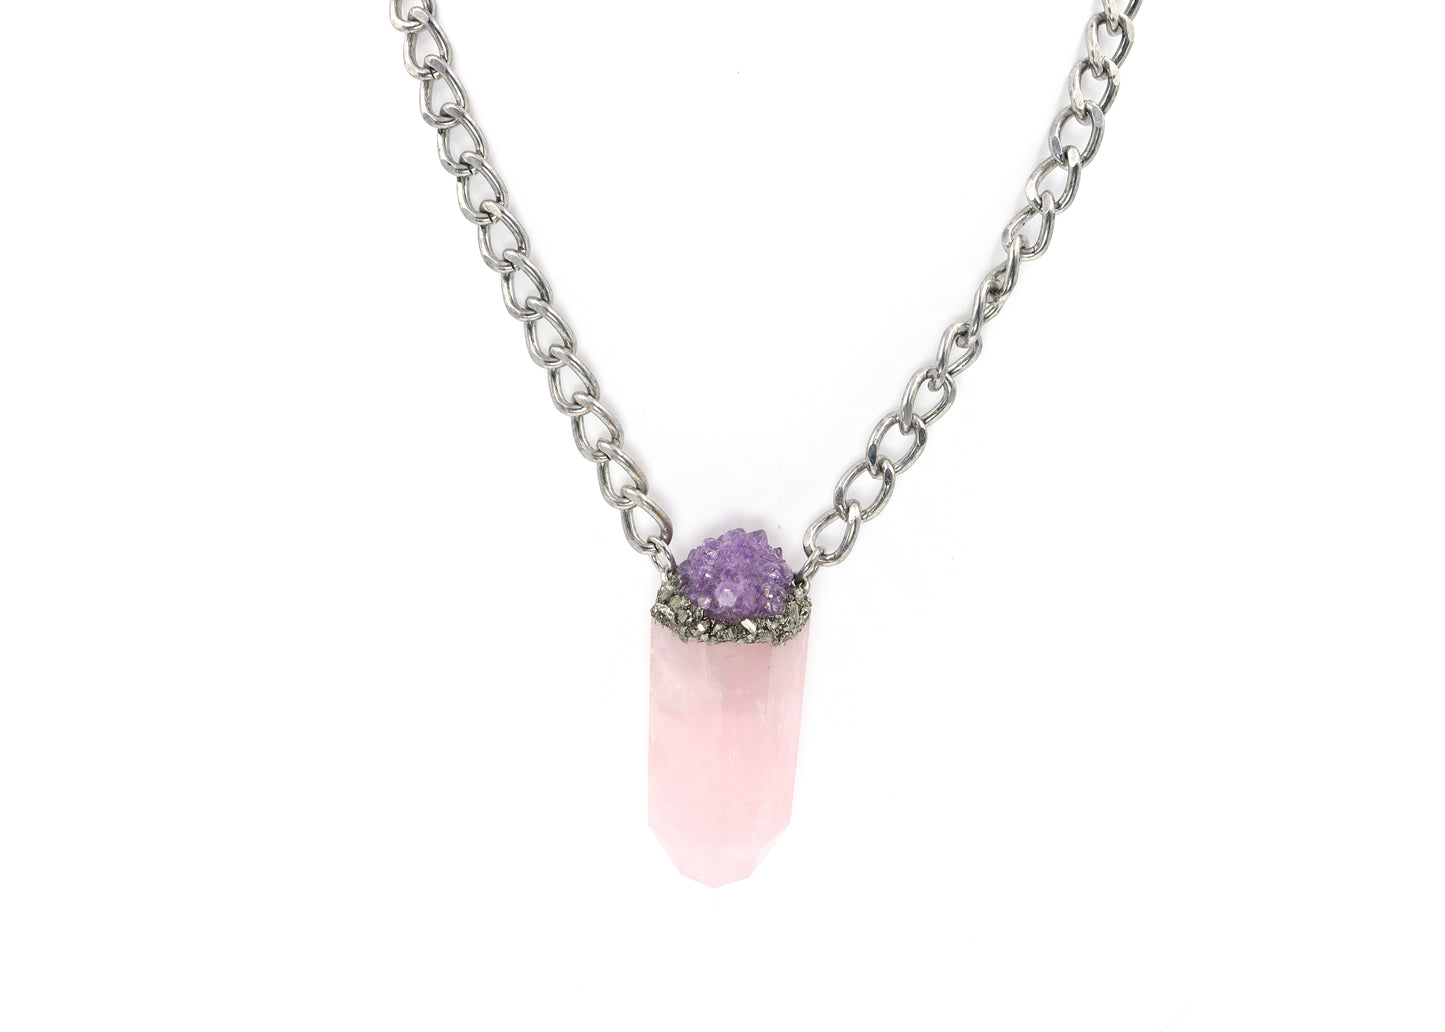 Rose Quartz, Amethyst, and Pyrite Crystal Necklace